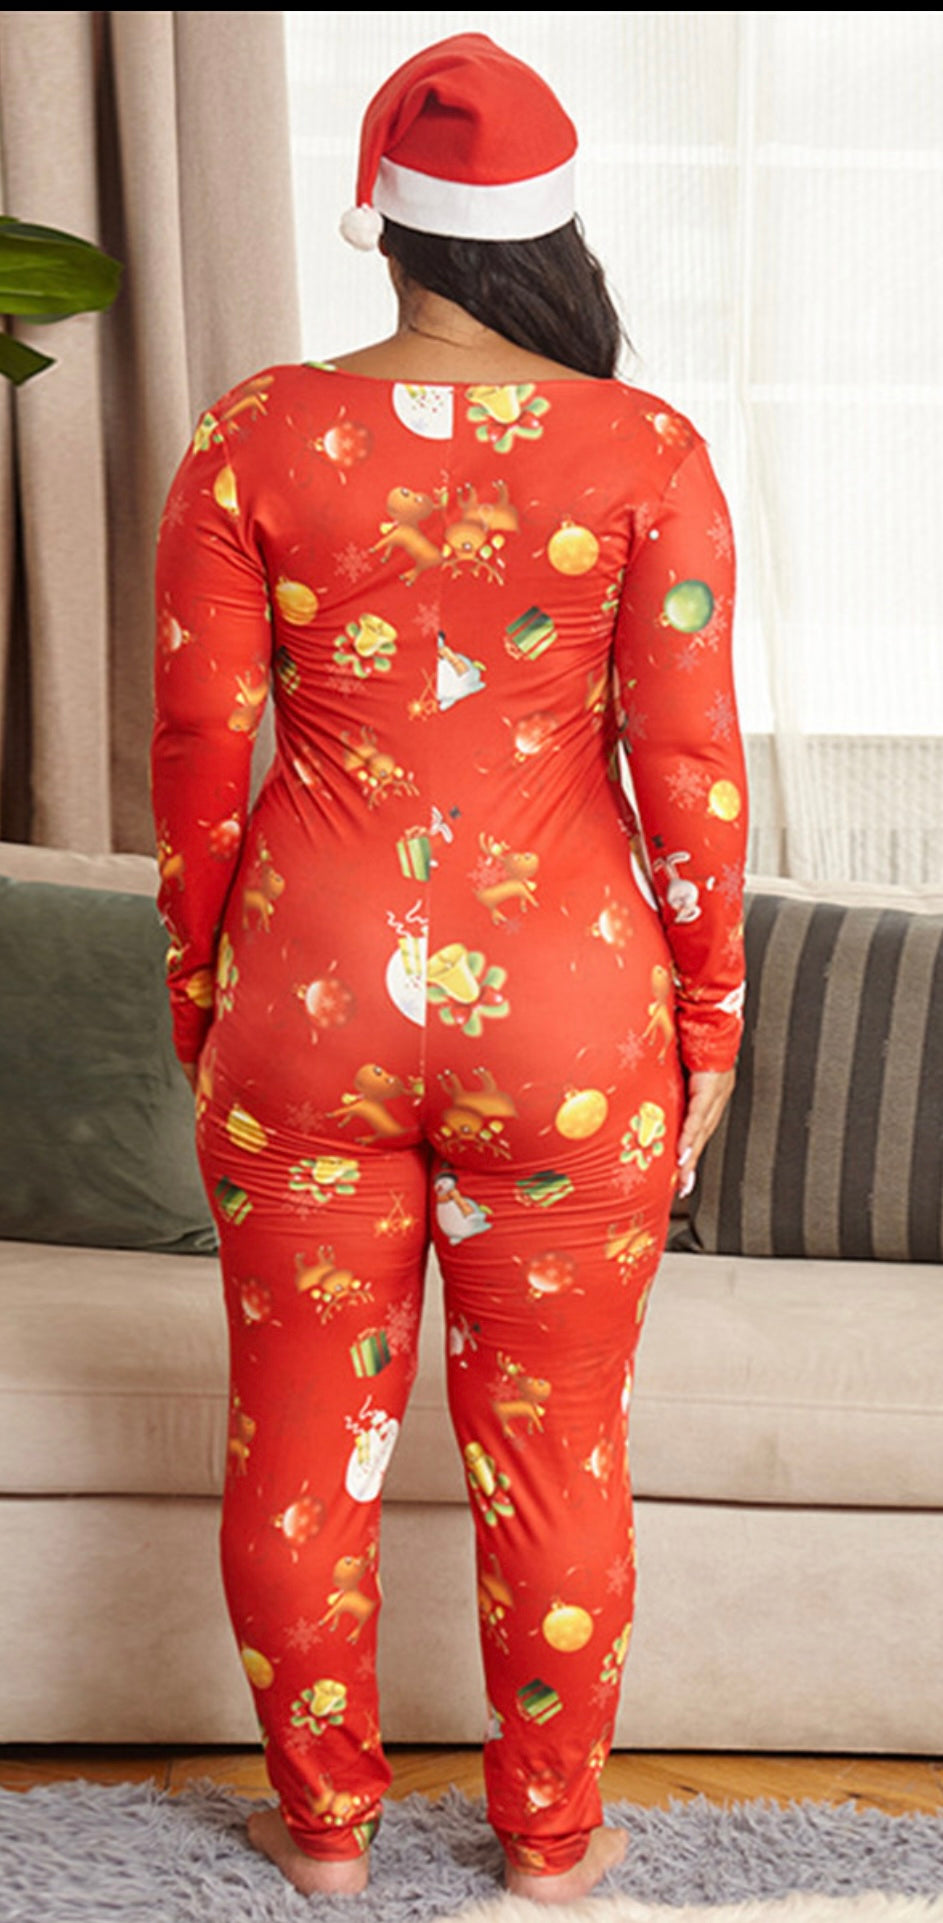 Plus Size Red Assorted Pants Onesie